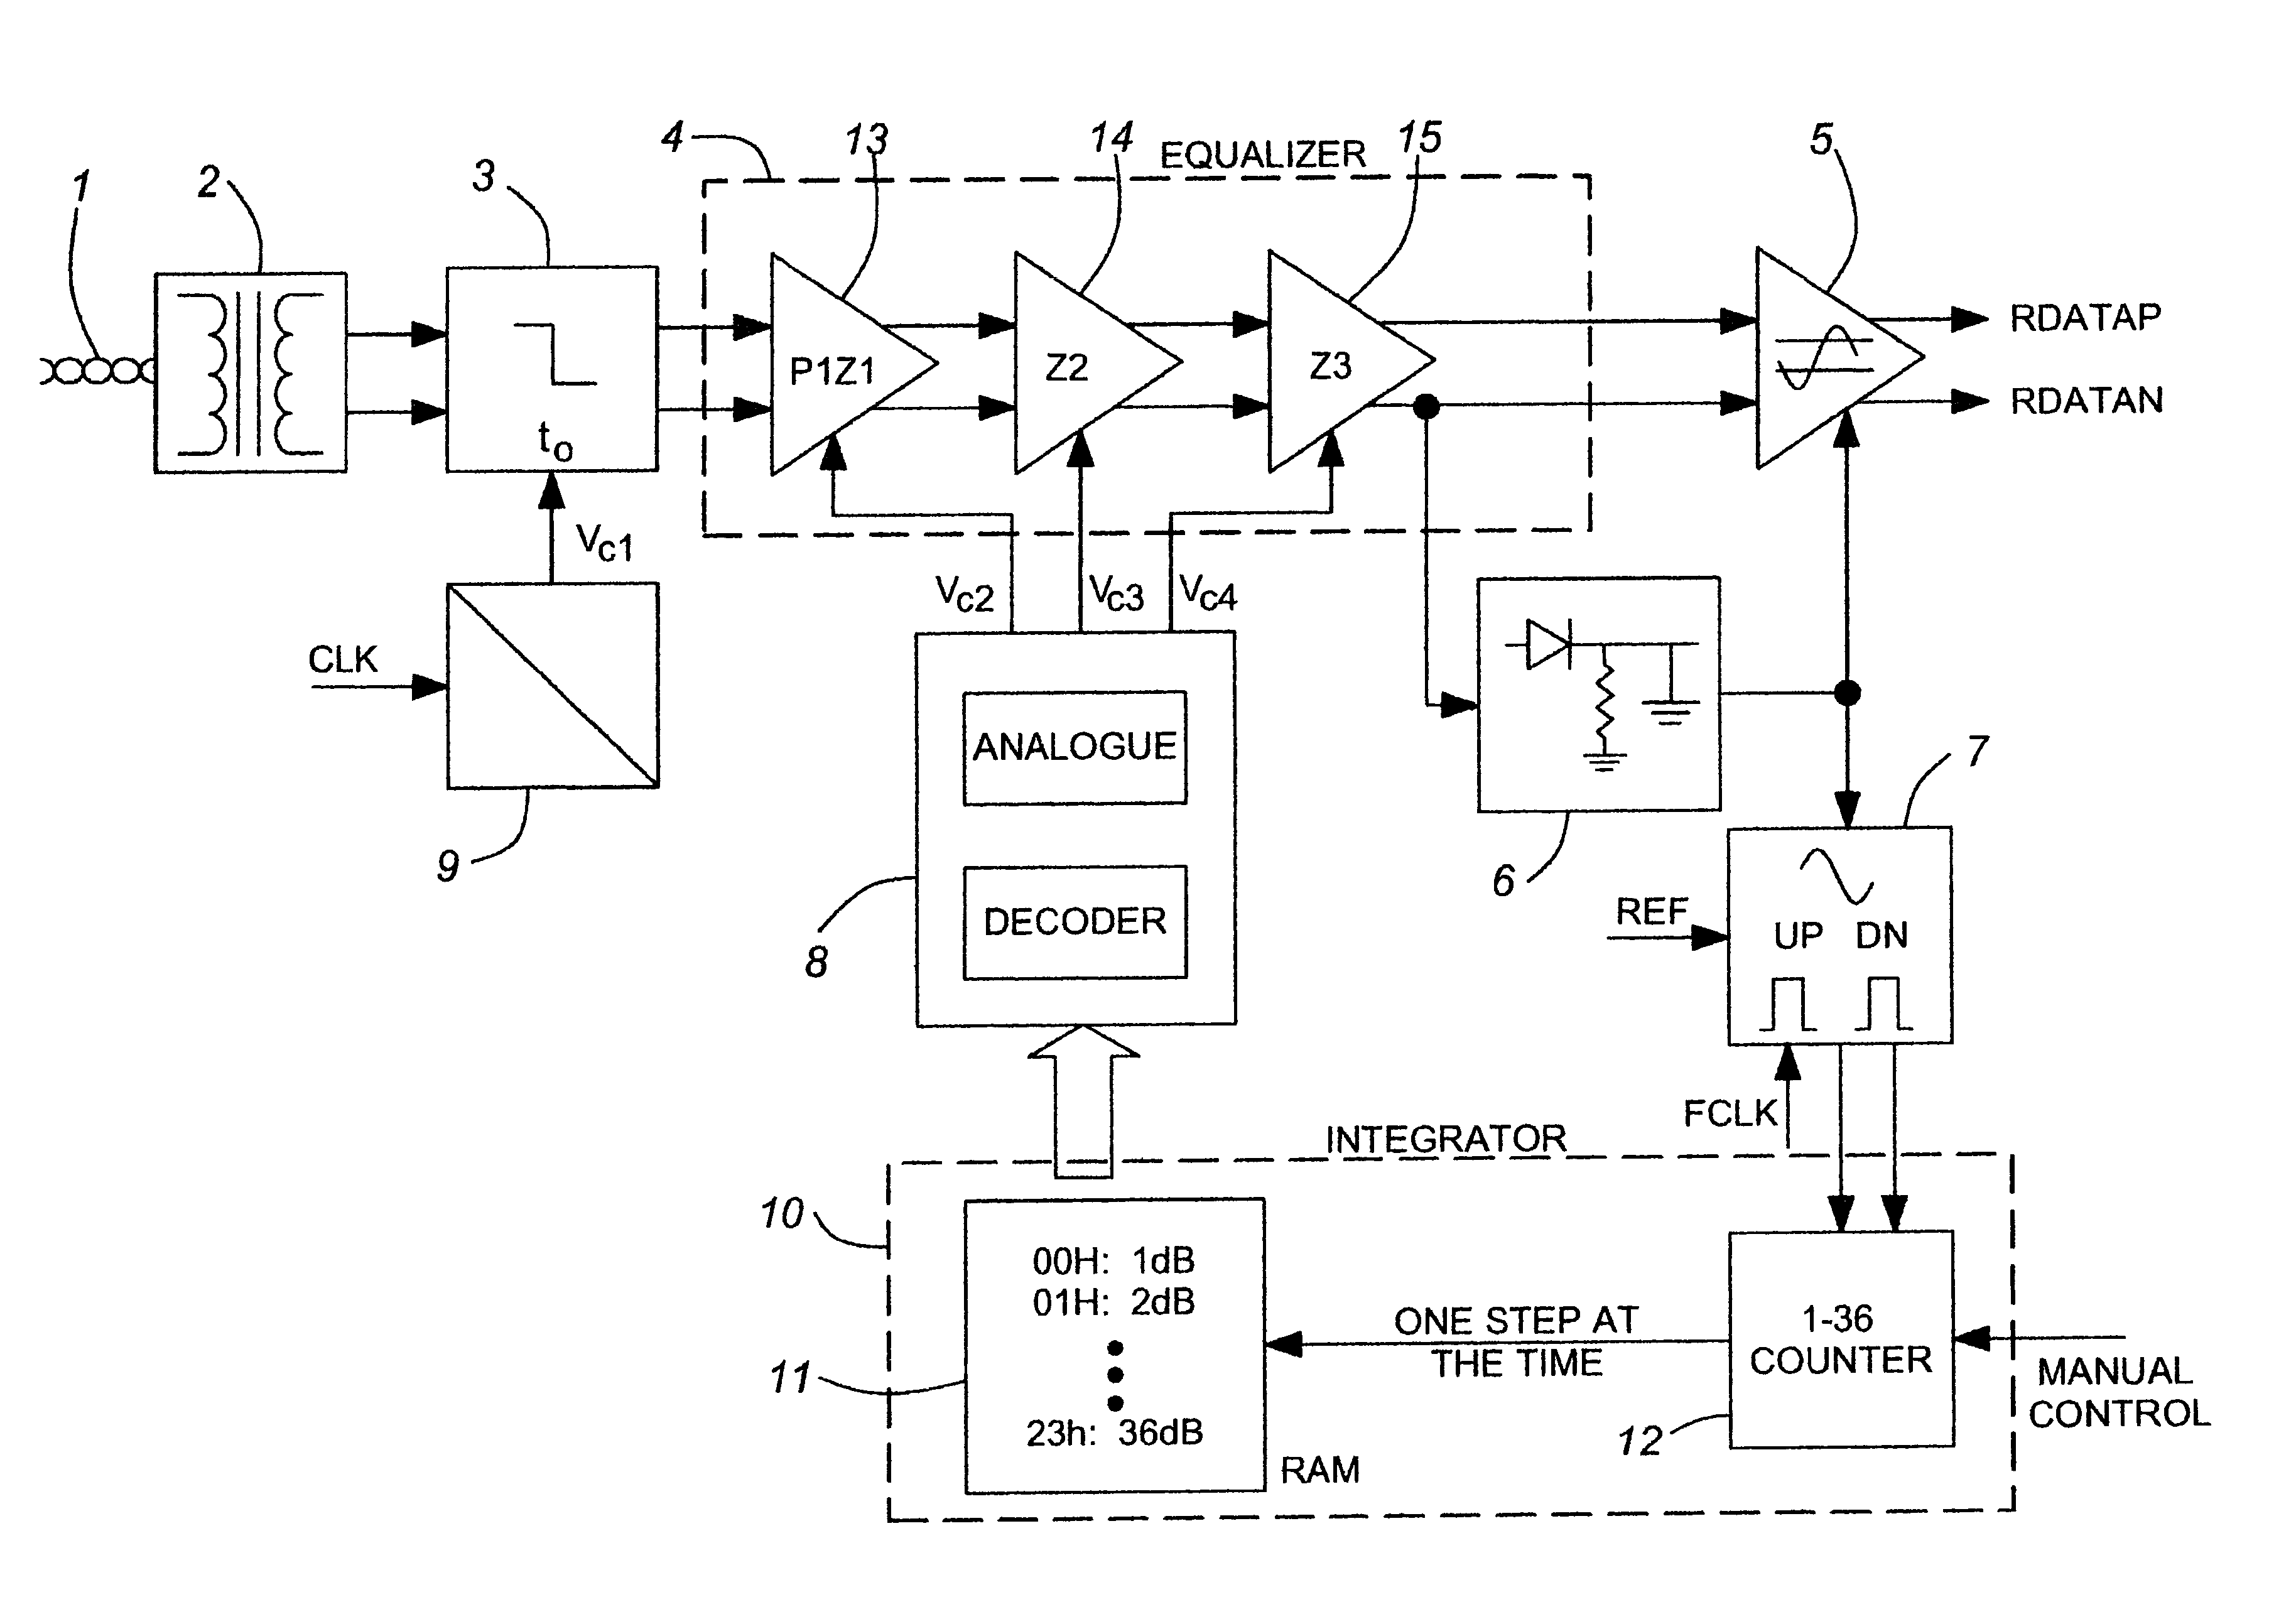 Implementation method for adaptive equalizer in CMOS